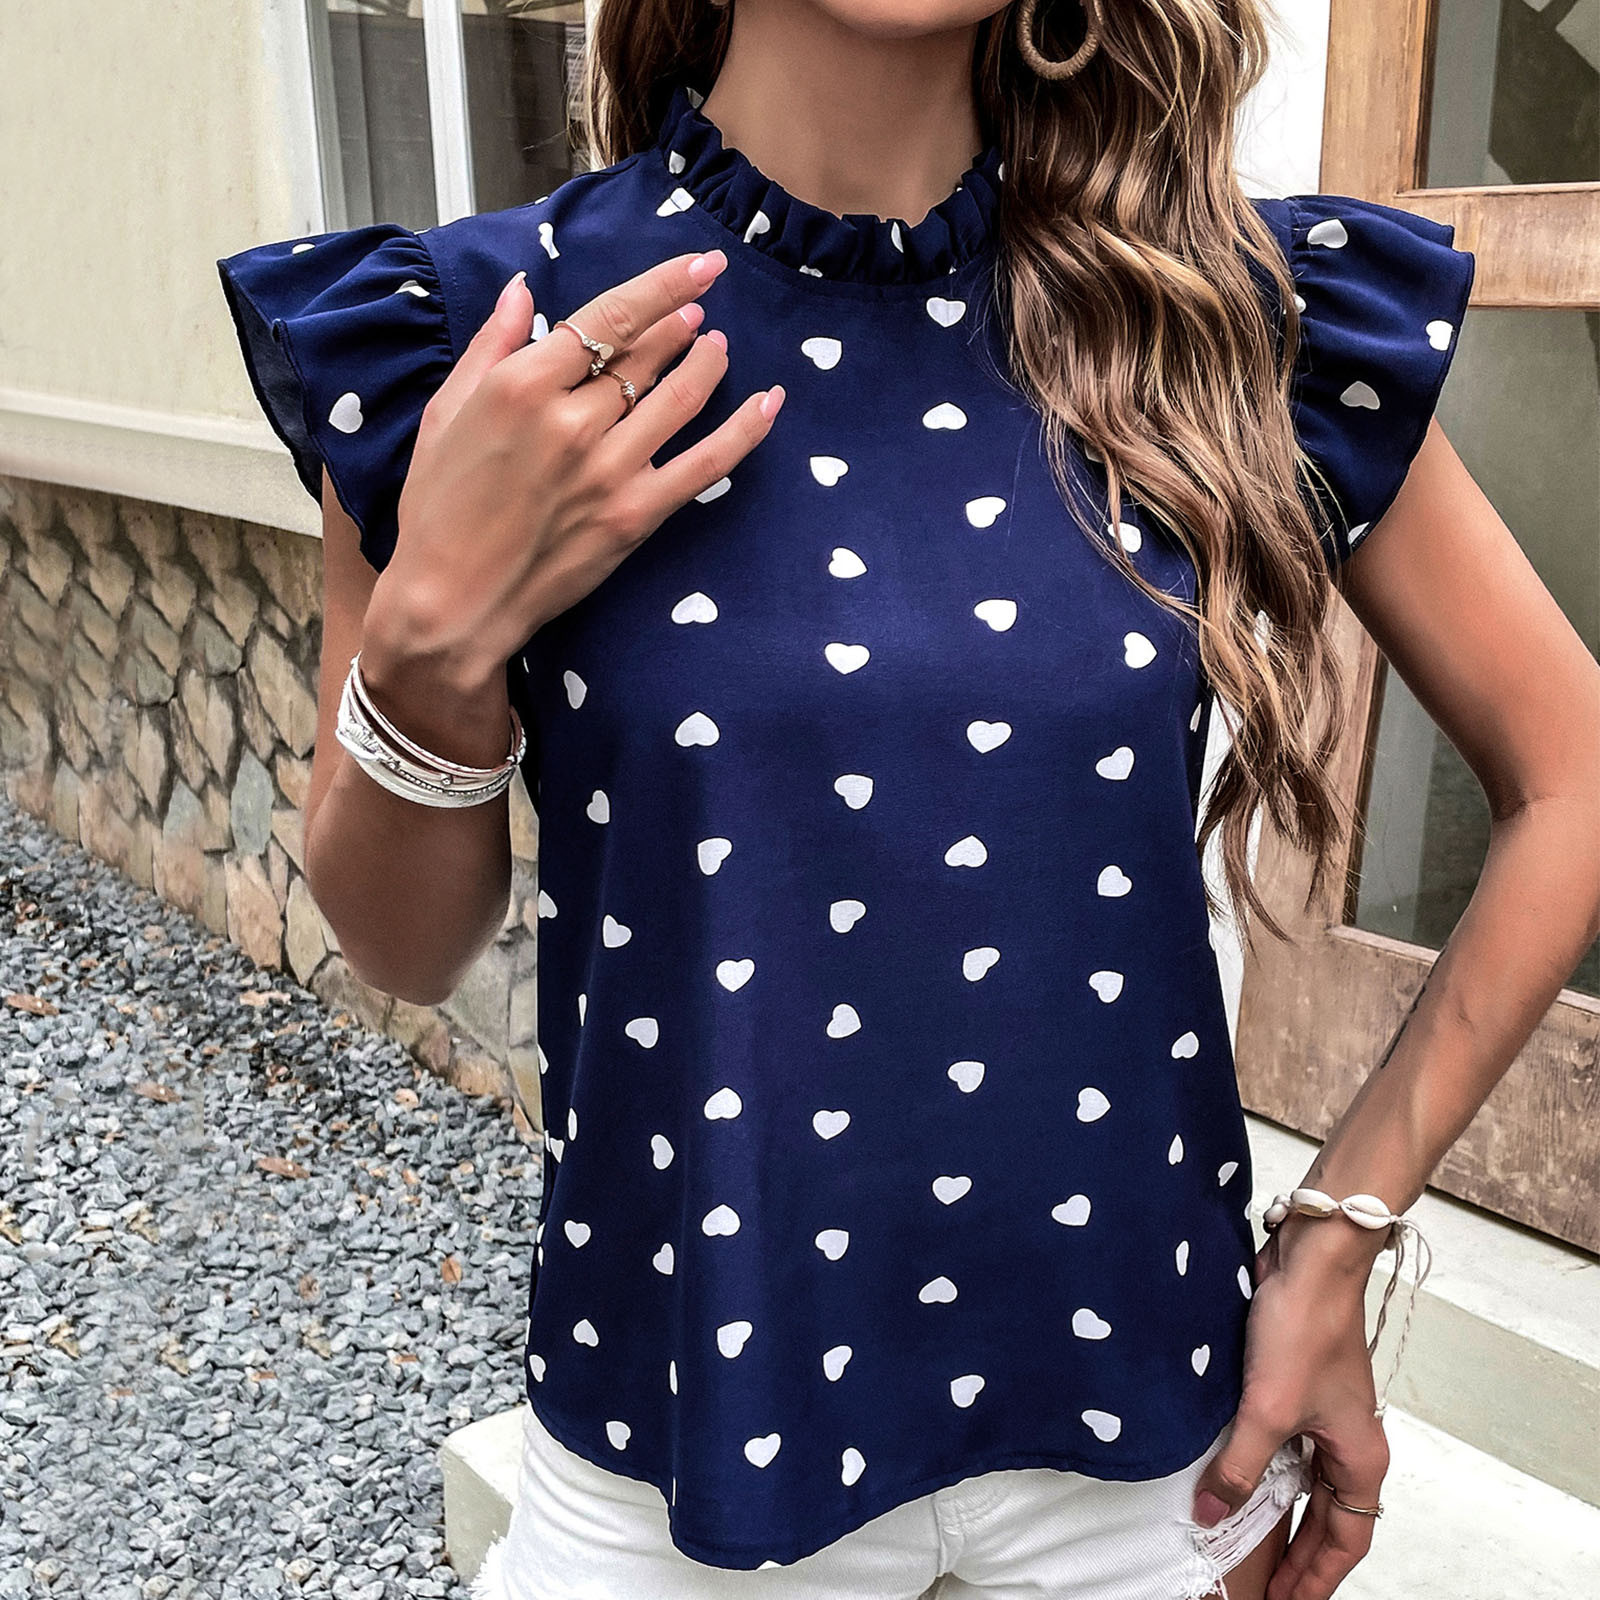 TAIAOJING Tshirt Women Summer Casual Short Sleeve Summer Pleated Polka Dot Round Neck Loose Top Fall T-Shirt - image 2 of 9